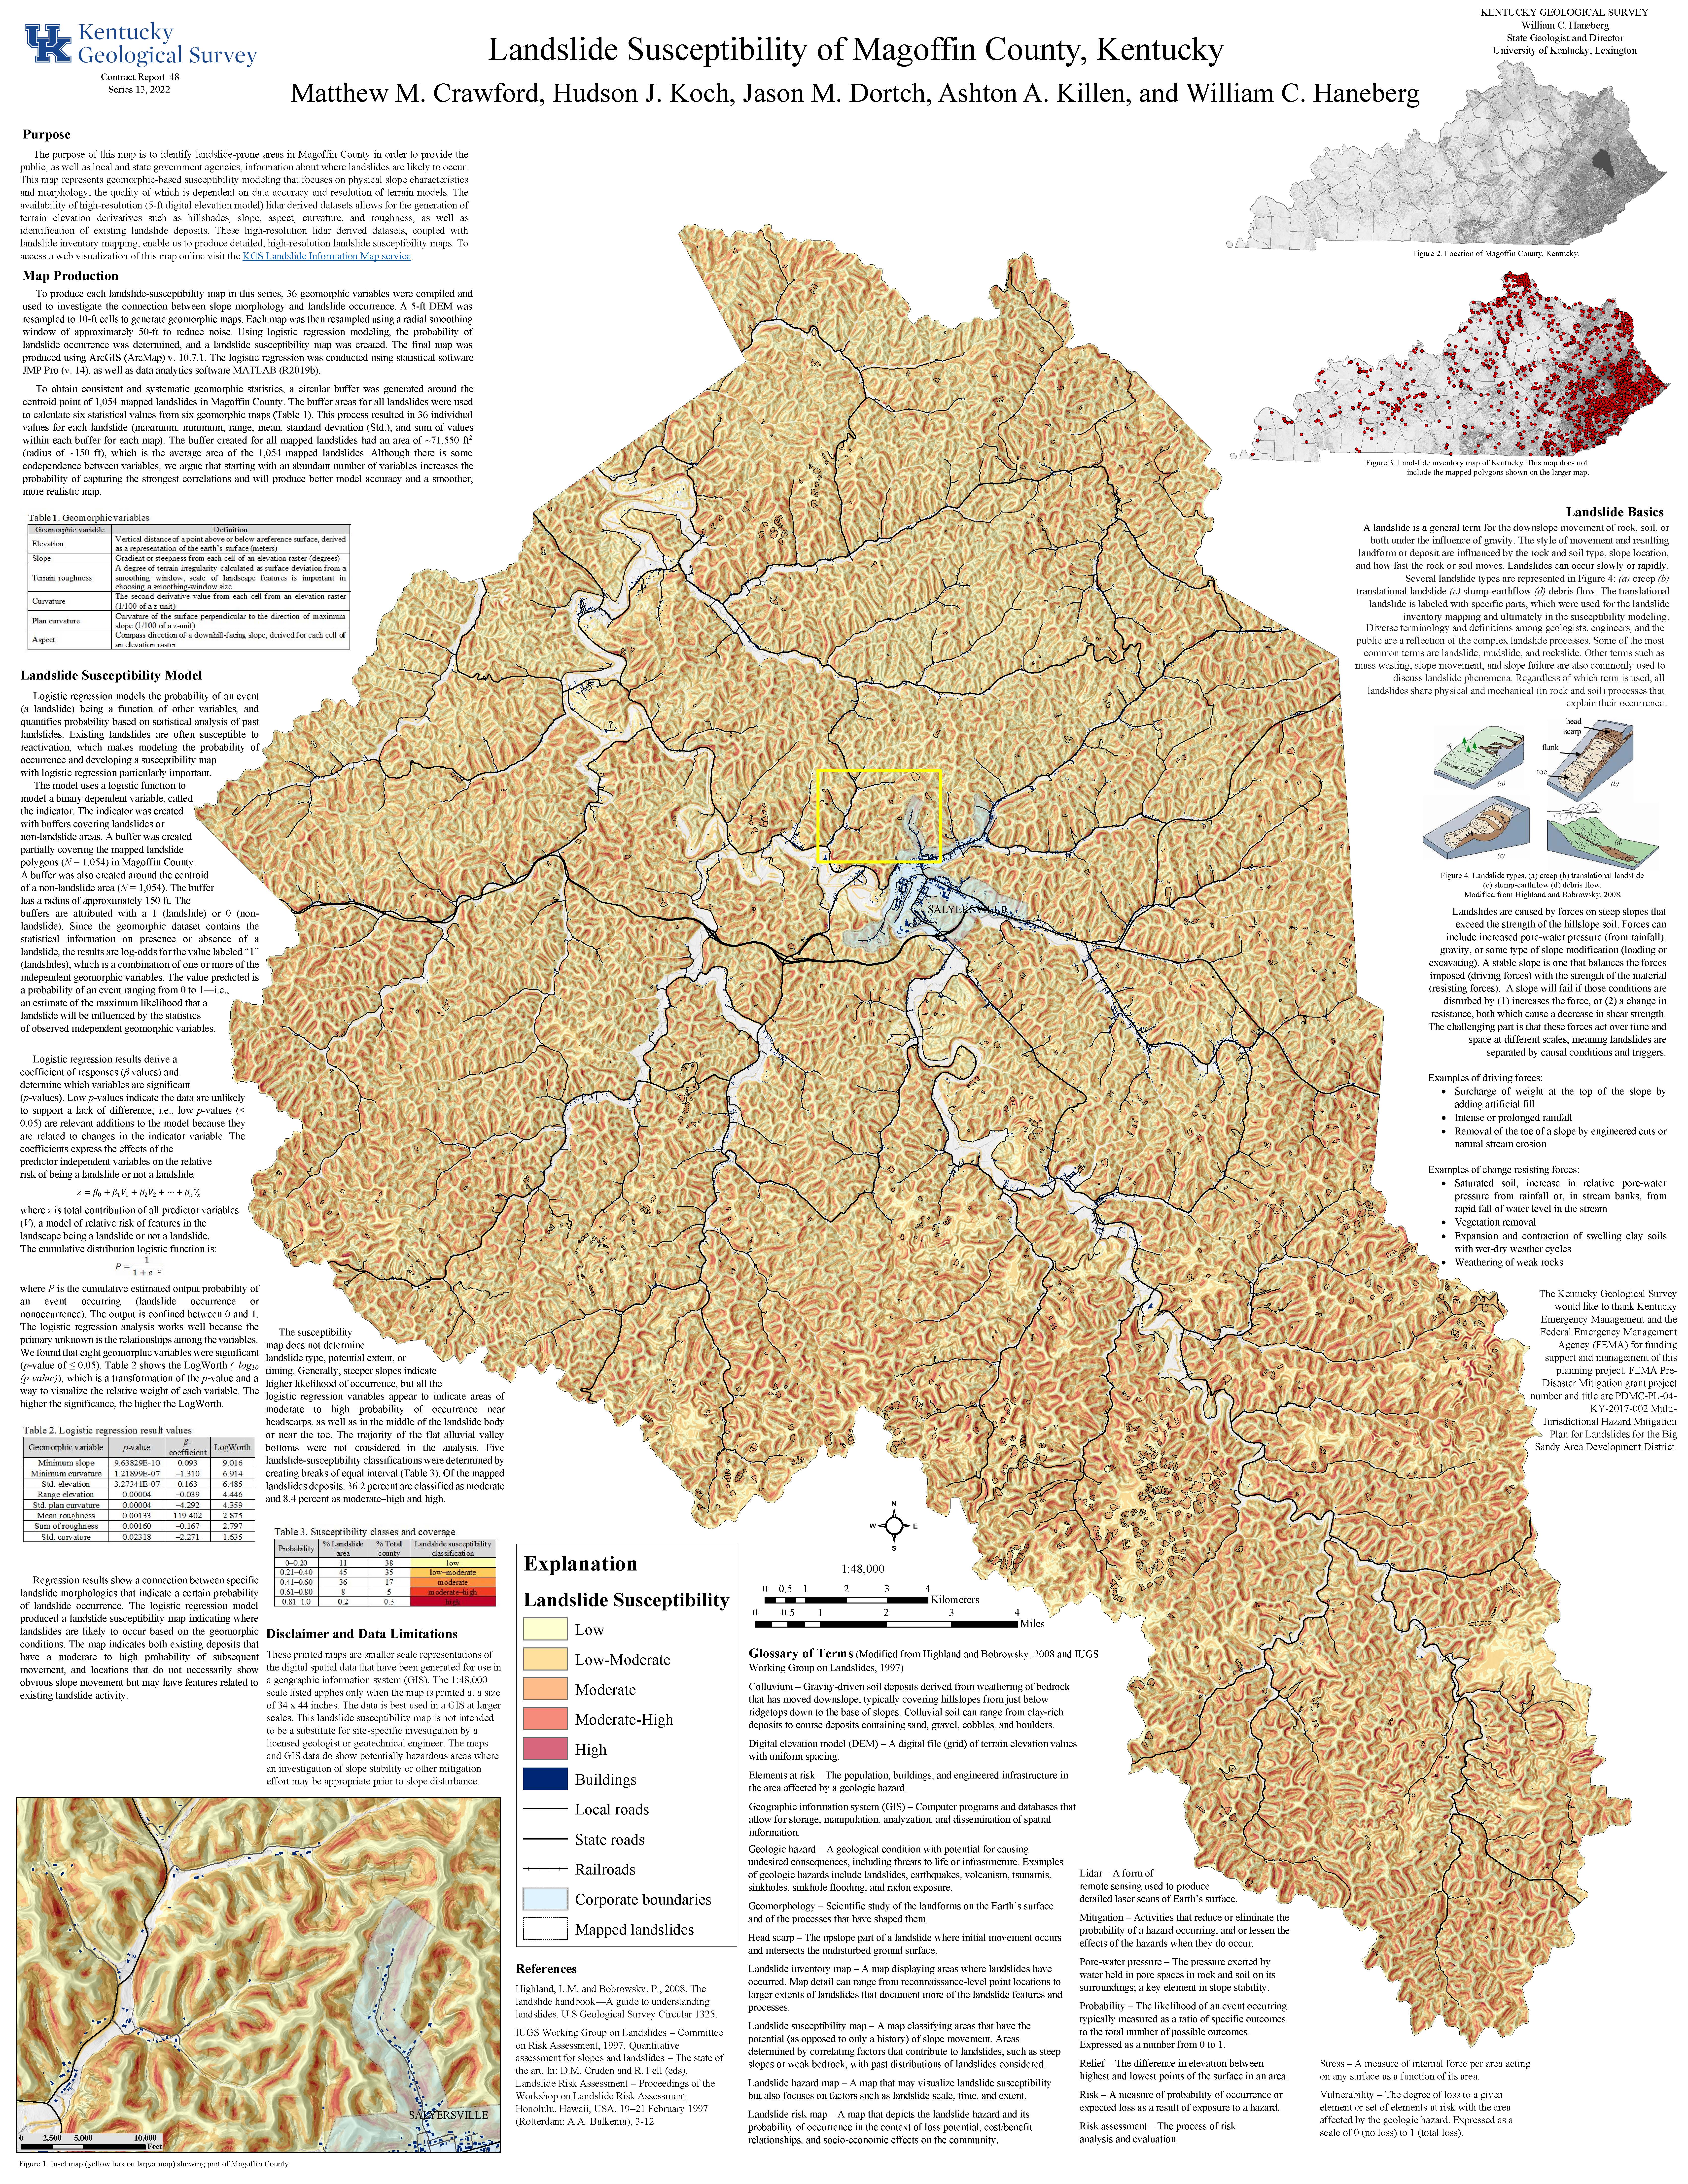 Landslide Susceptibility Map of Magoffin County